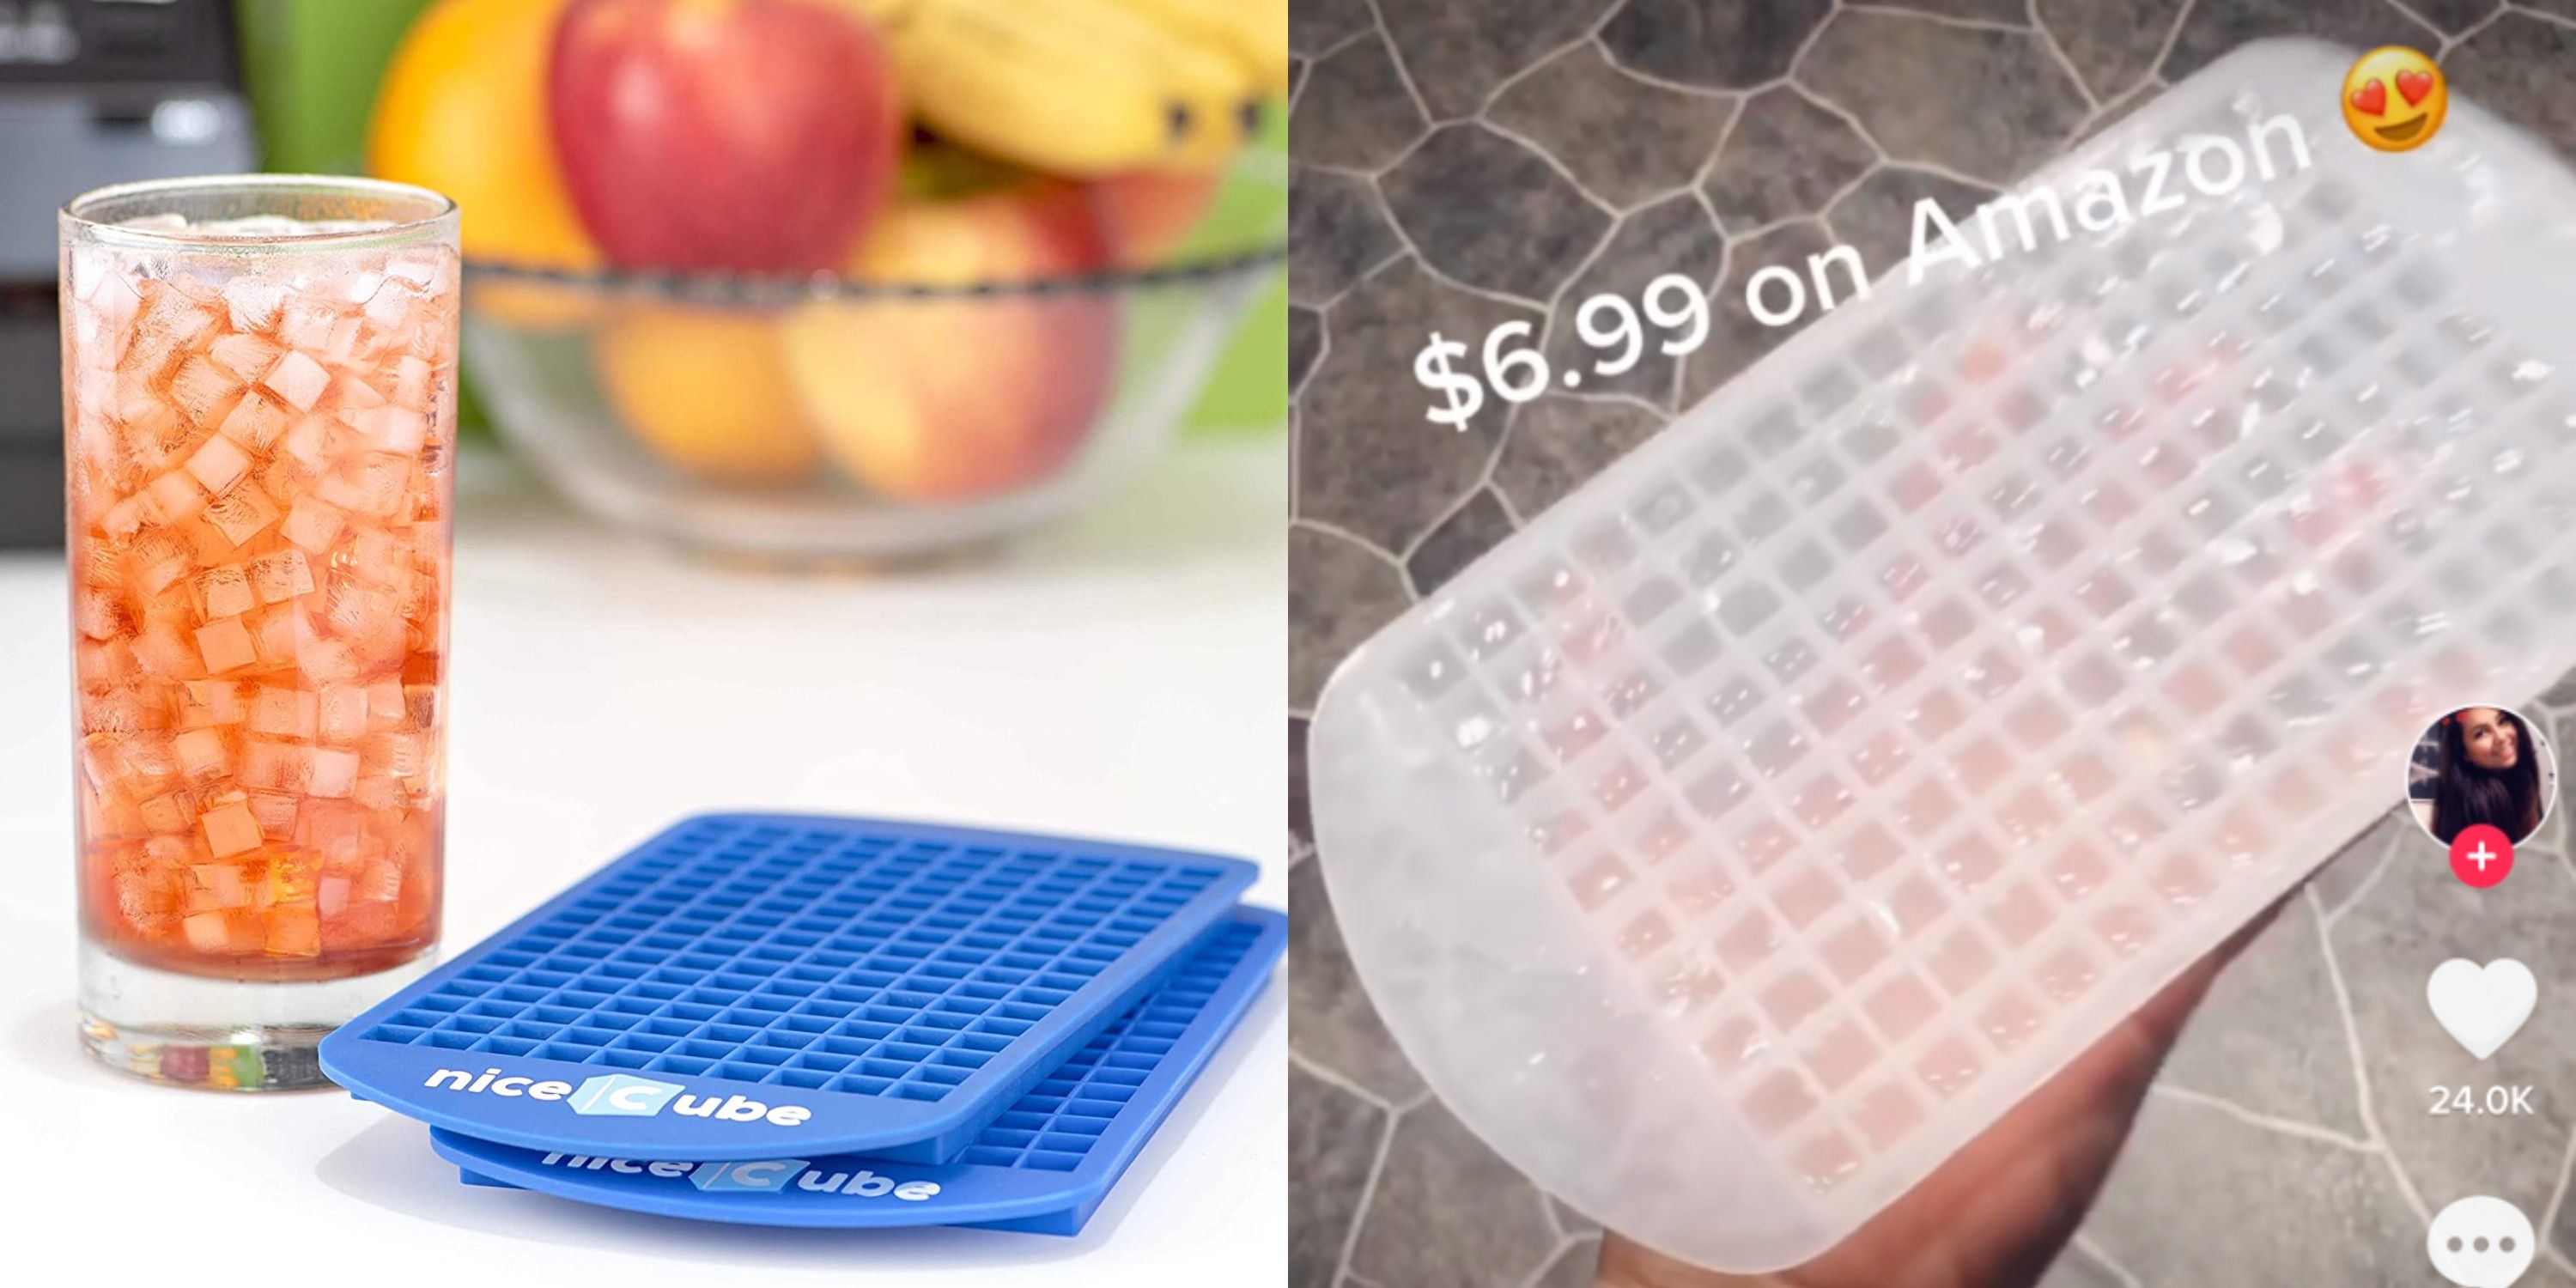 This TikTok Ice Cube Tray Hack Just Blew My Mind